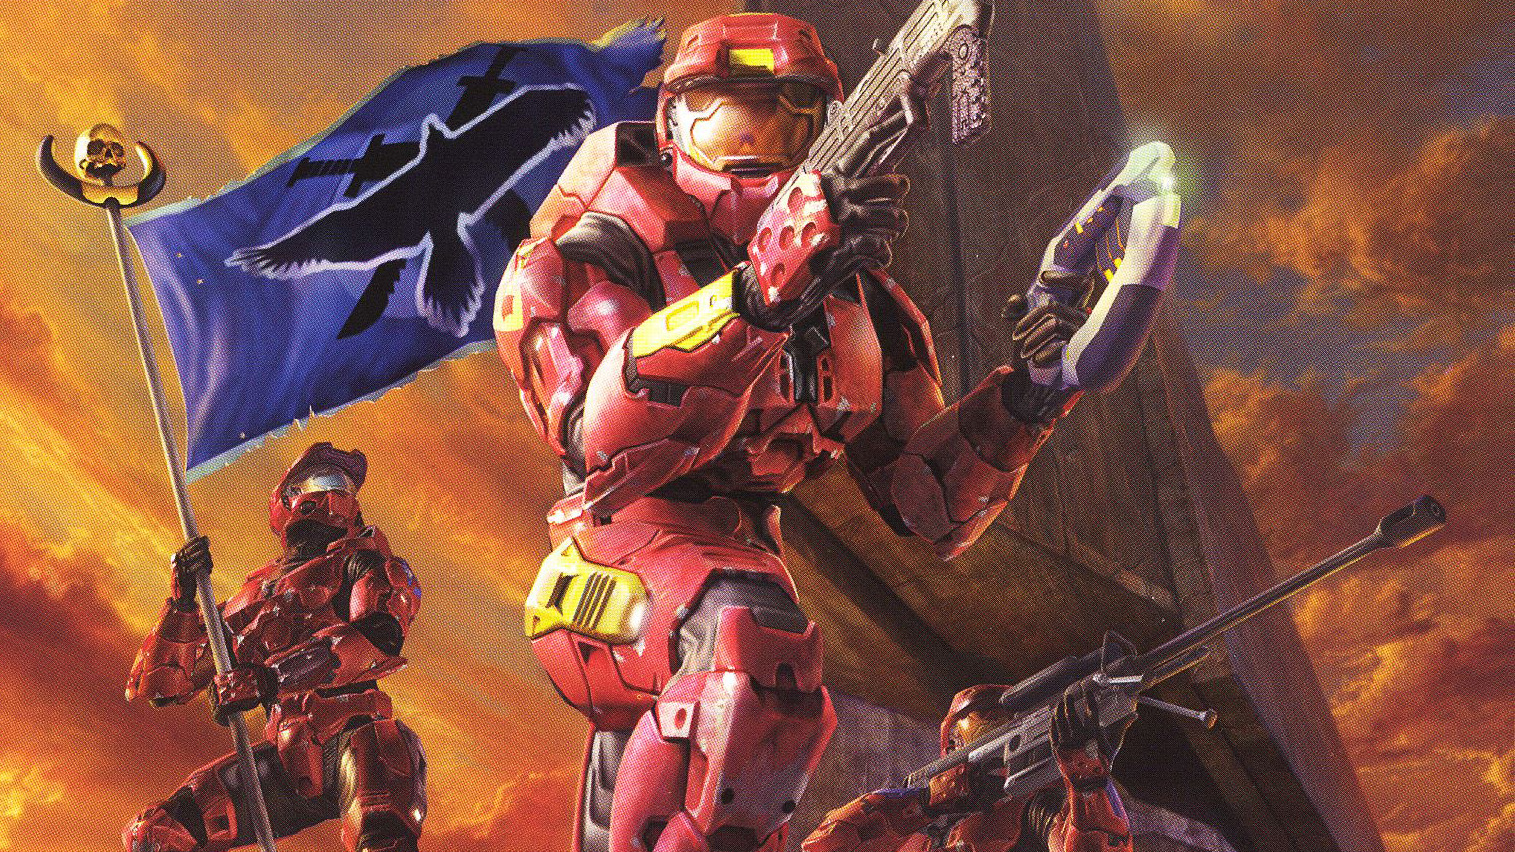 You are currently viewing Halo Multiplayer Modes Ranked From Worst to Best